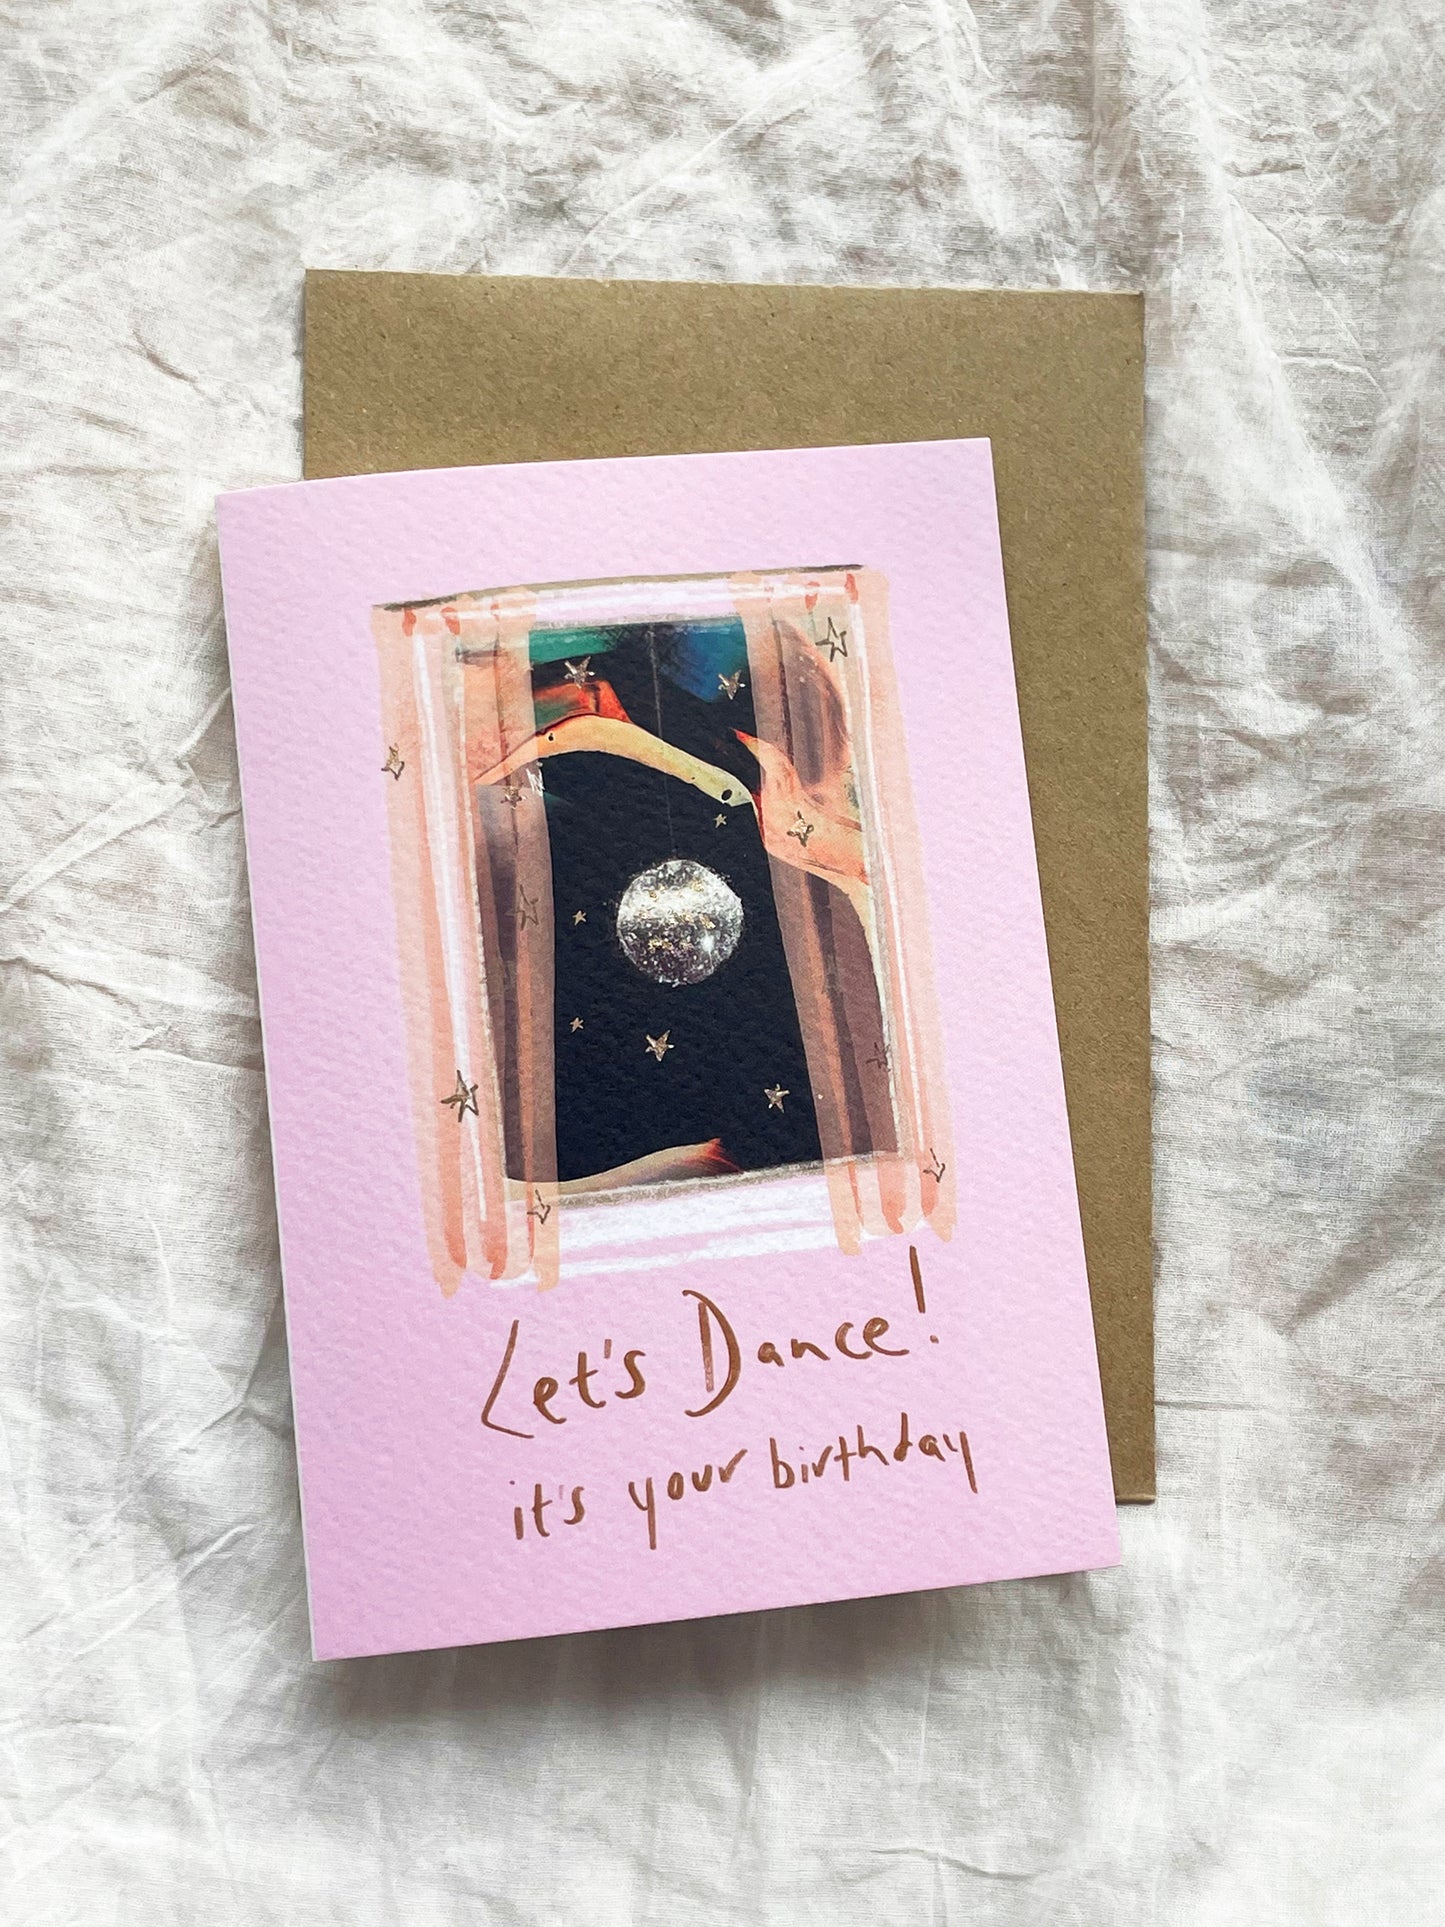 Let's disco it's your birthday greeting card